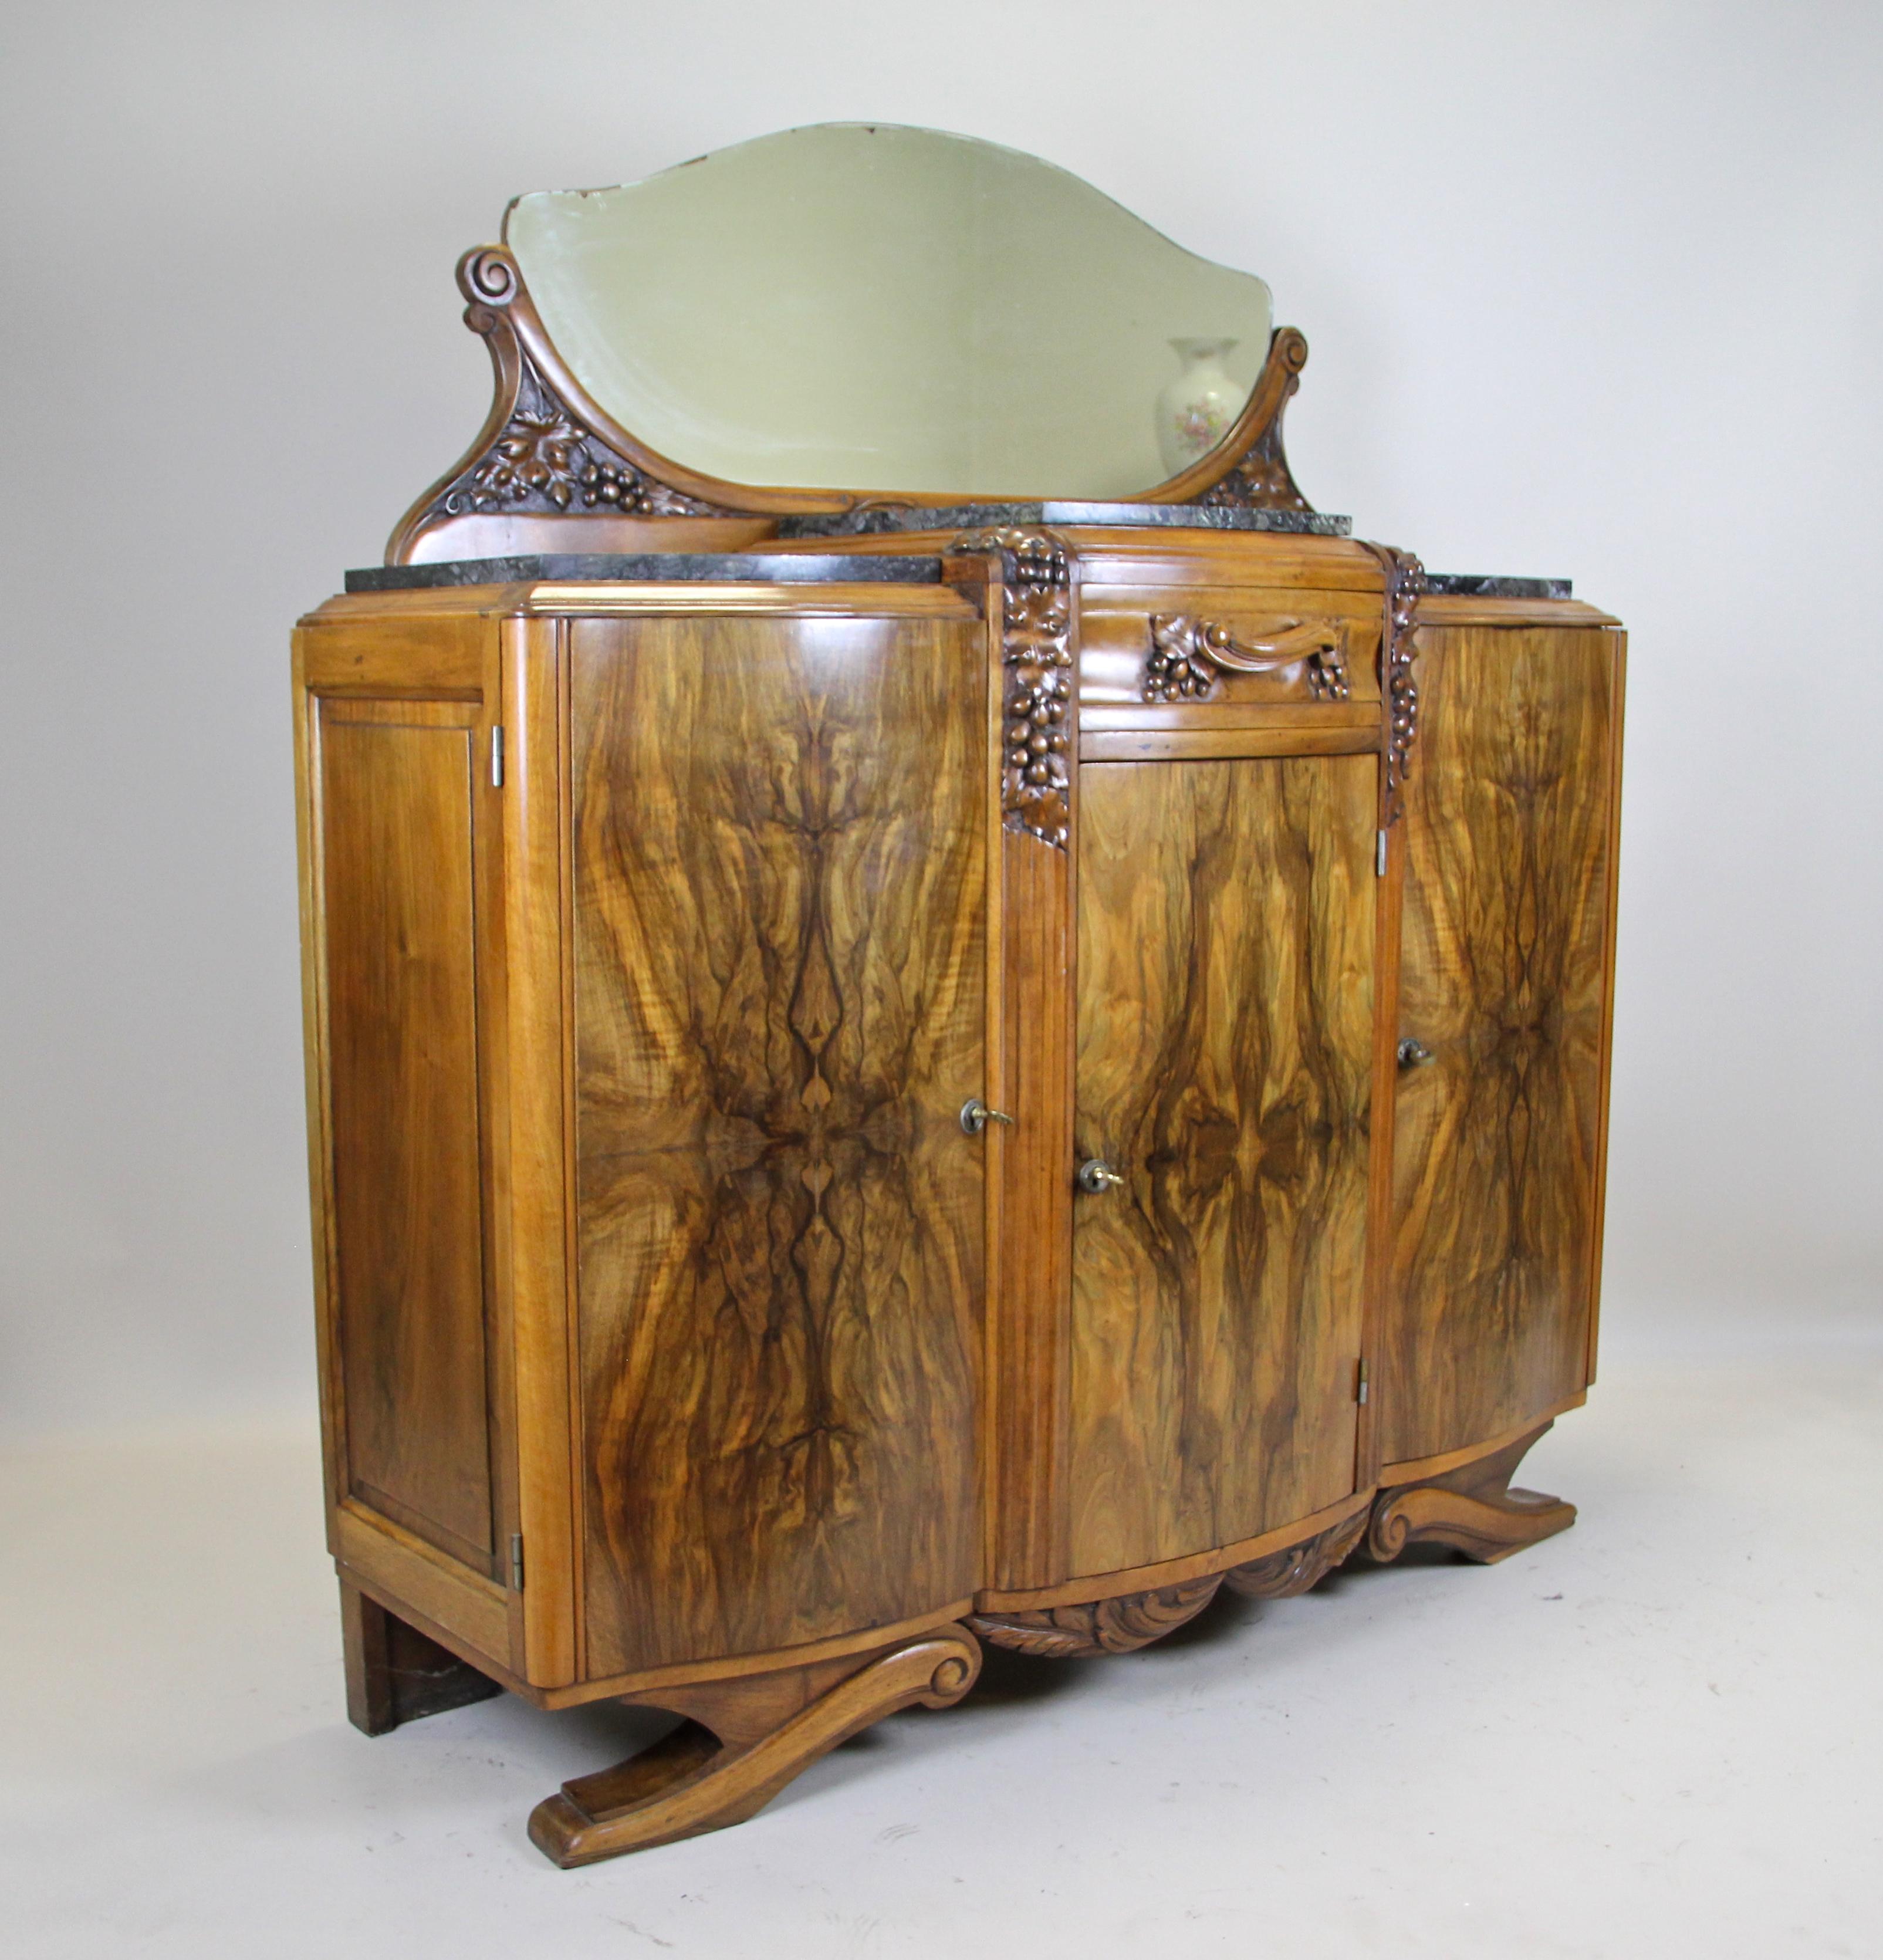 Unusual Art Deco commode from France, circa 1925. Wonderful bookmatched burl on the front was set in a very graceful manner. The unique shaped Art Deco Buffet comes with three large doors, underlined by an exceptional grain, that can be wide opened